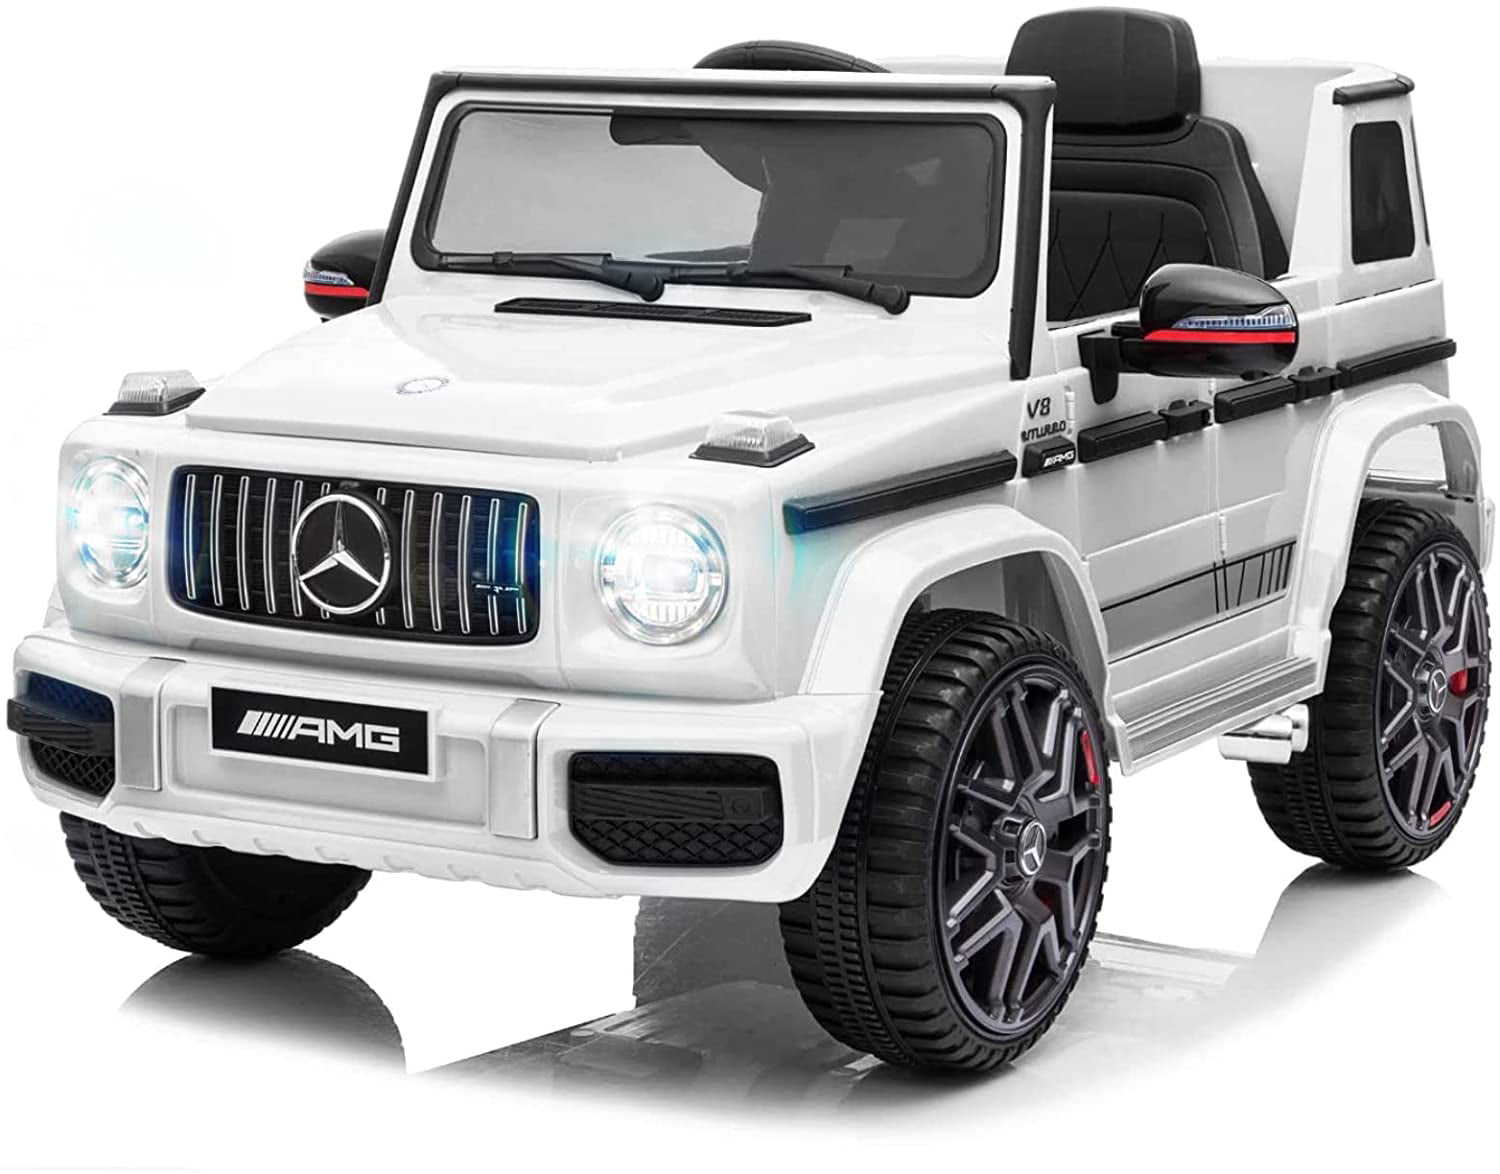 Mercedes Benz Licensed AMG G63 Ride On Car Music Pickup Truck Remote Control Toy